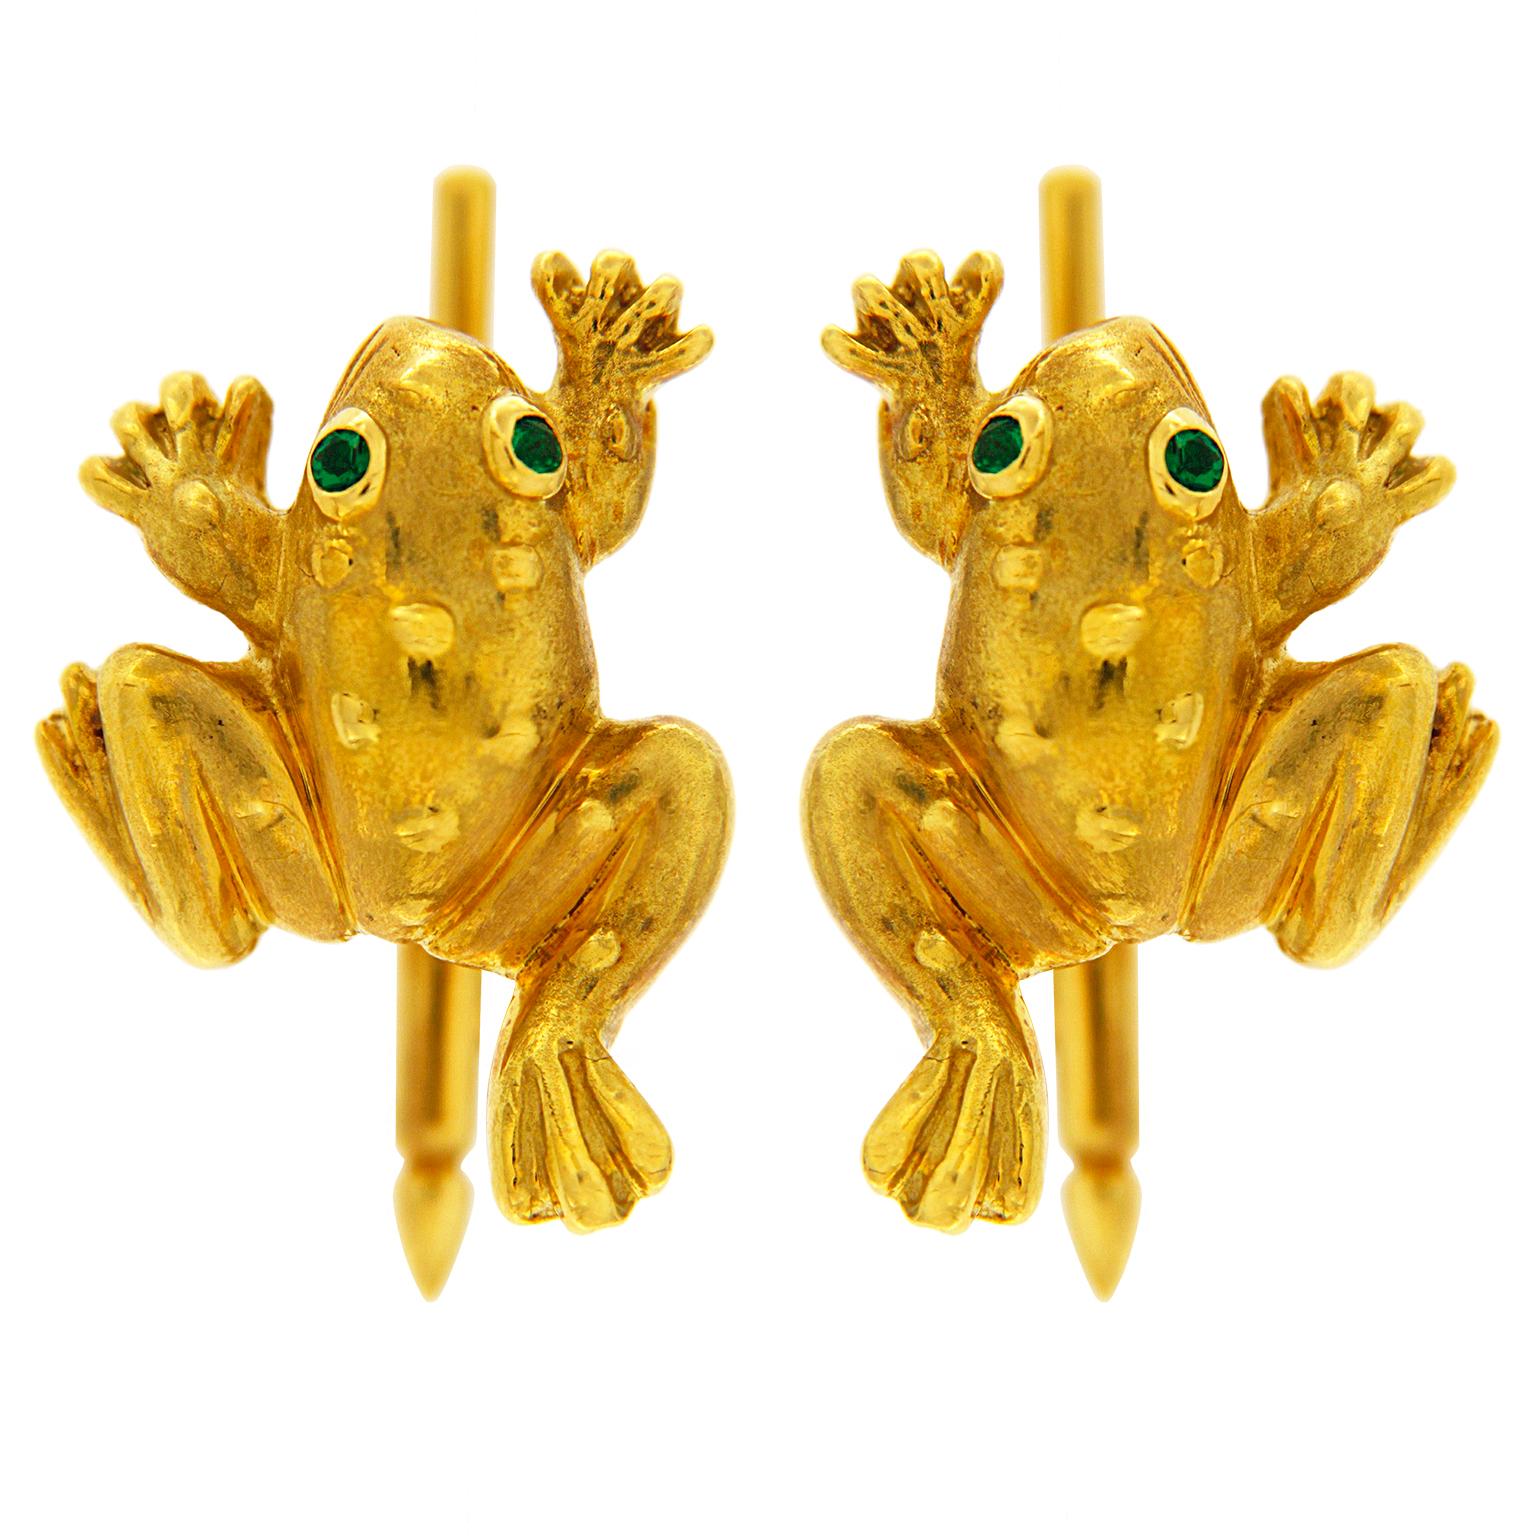 Valentin Magro Textured Gold Frog Shirt Studs feature a whimsical design. The animals are shaped from 18k yellow gold, with One front leg and opposite back leg outstretched, making them appear on the move. While most of their bodies have downplayed